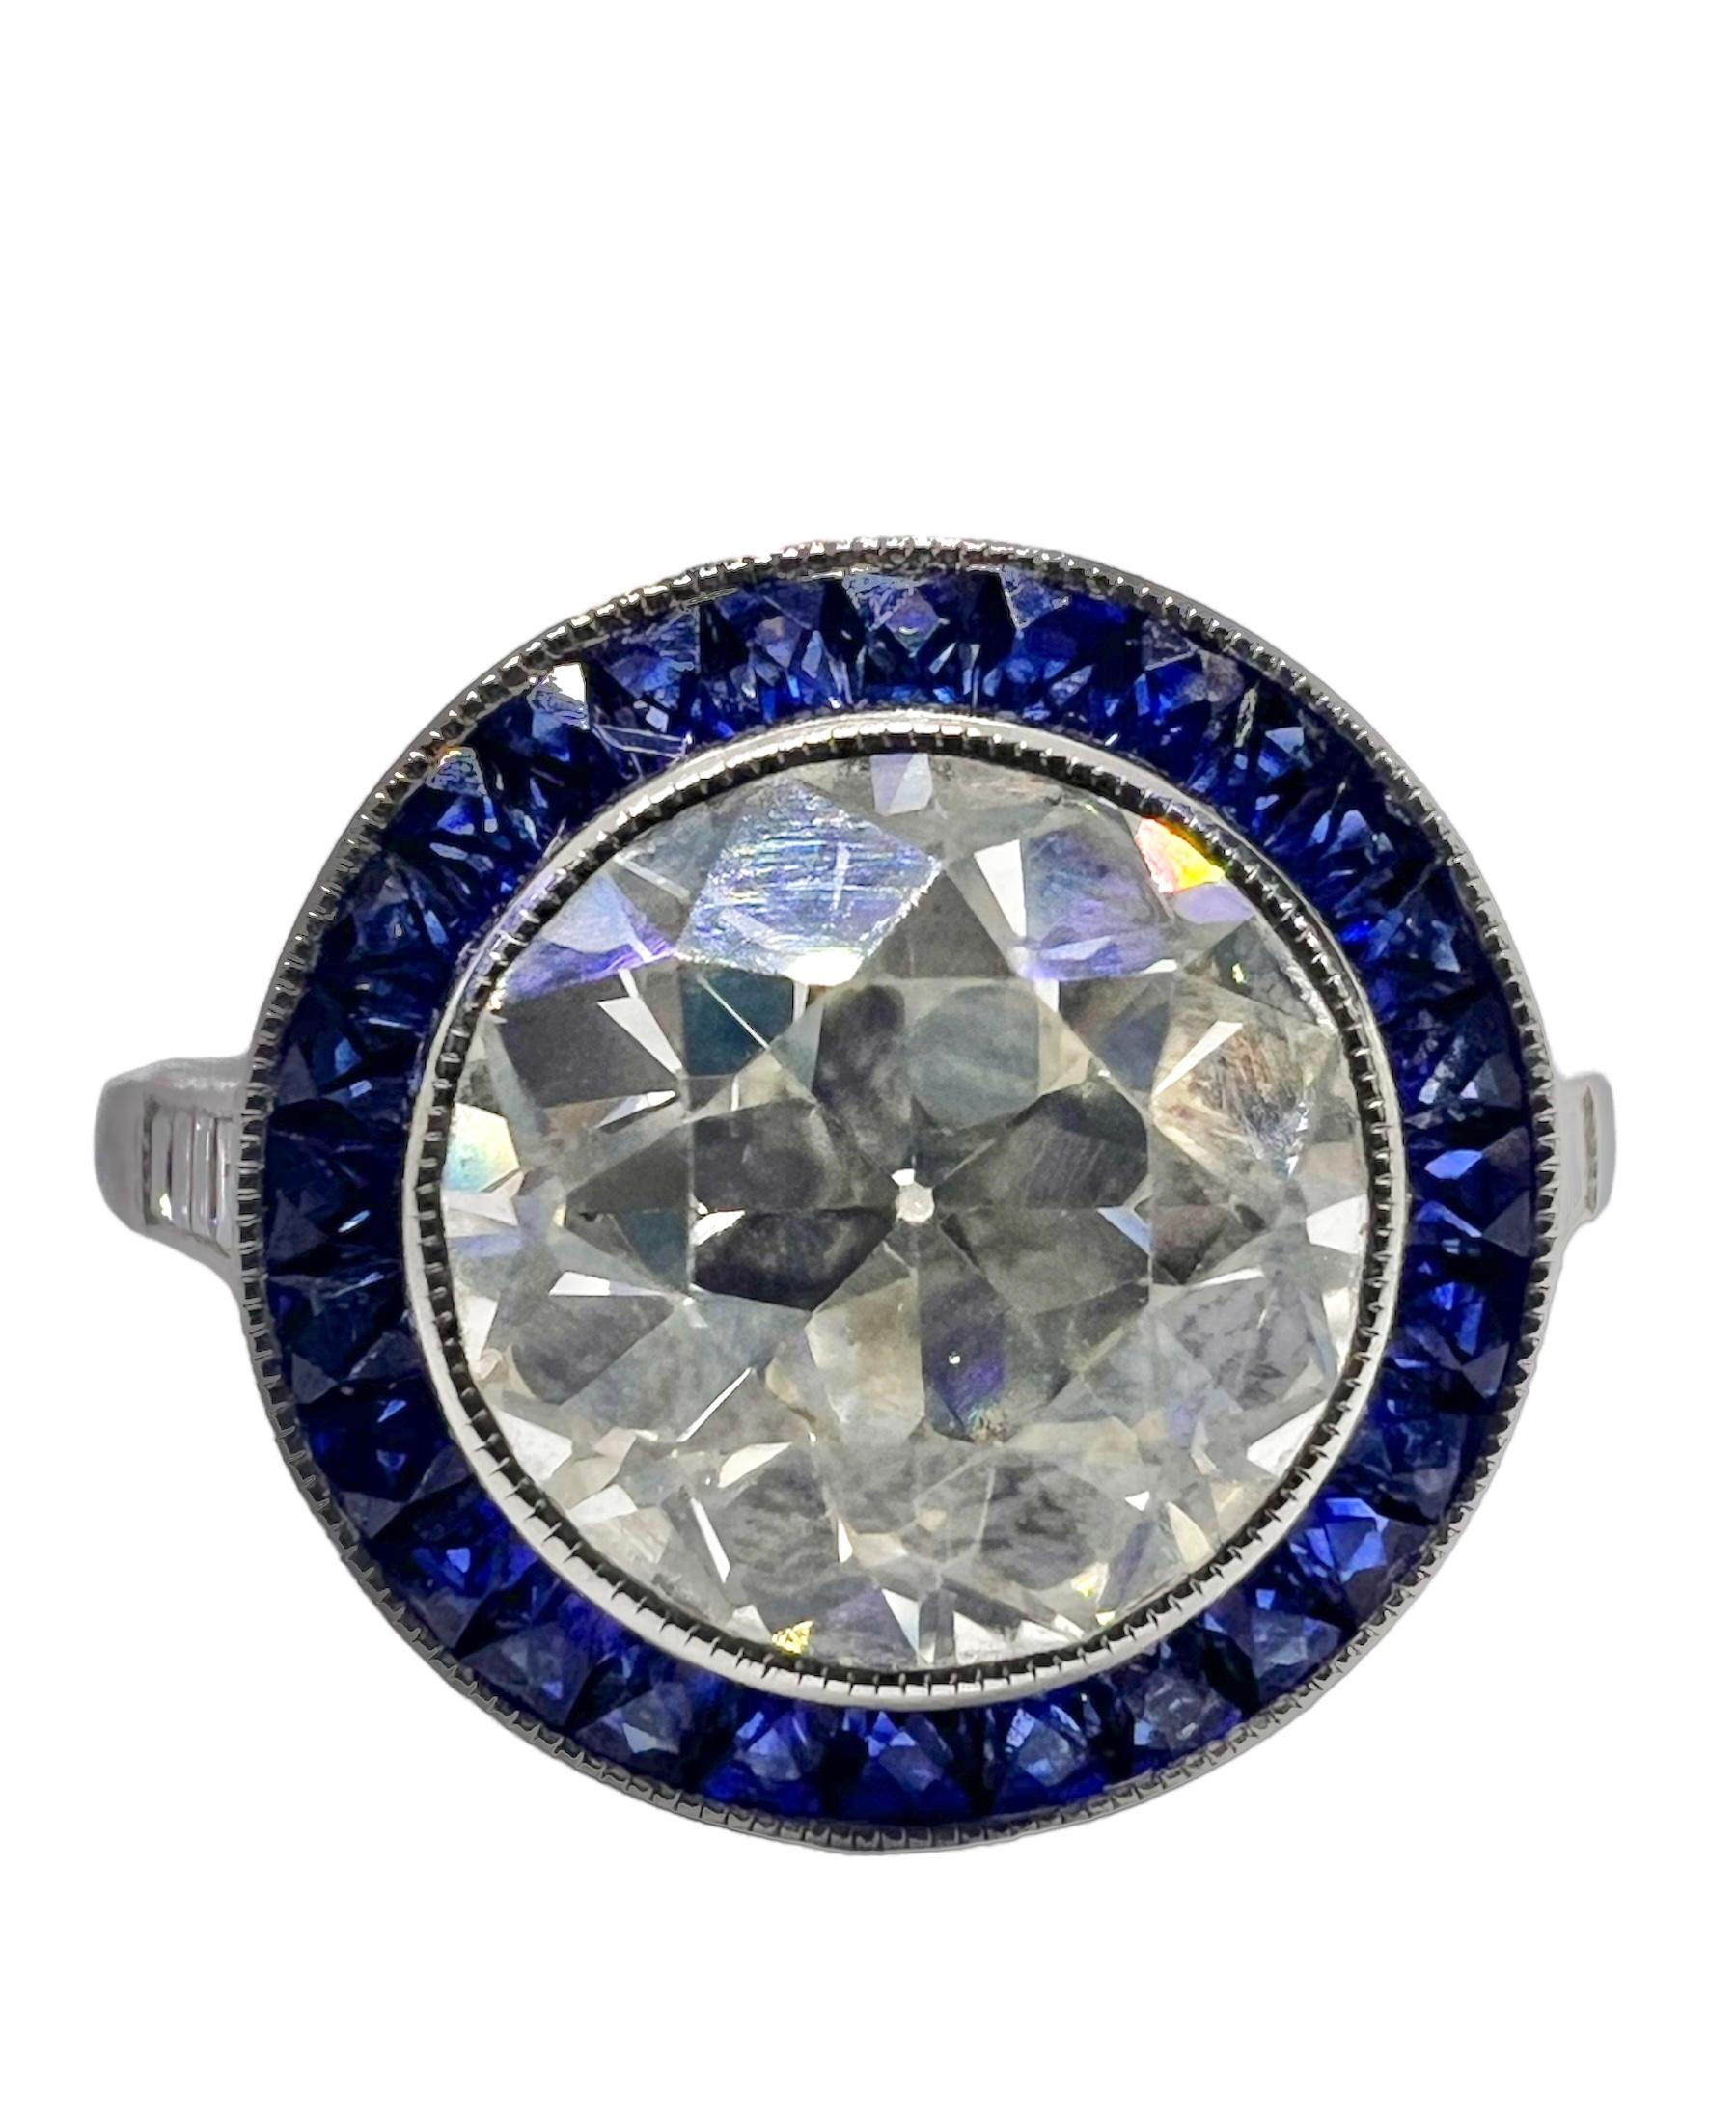 Sophia D. art deco ring in platinum setting with 2.07 carat center round diamond, 0.12 carat small diamonds and 0.50 carats blue sapphire.

Sophia D by Joseph Dardashti LTD has been known worldwide for 35 years and are inspired by classic Art Deco